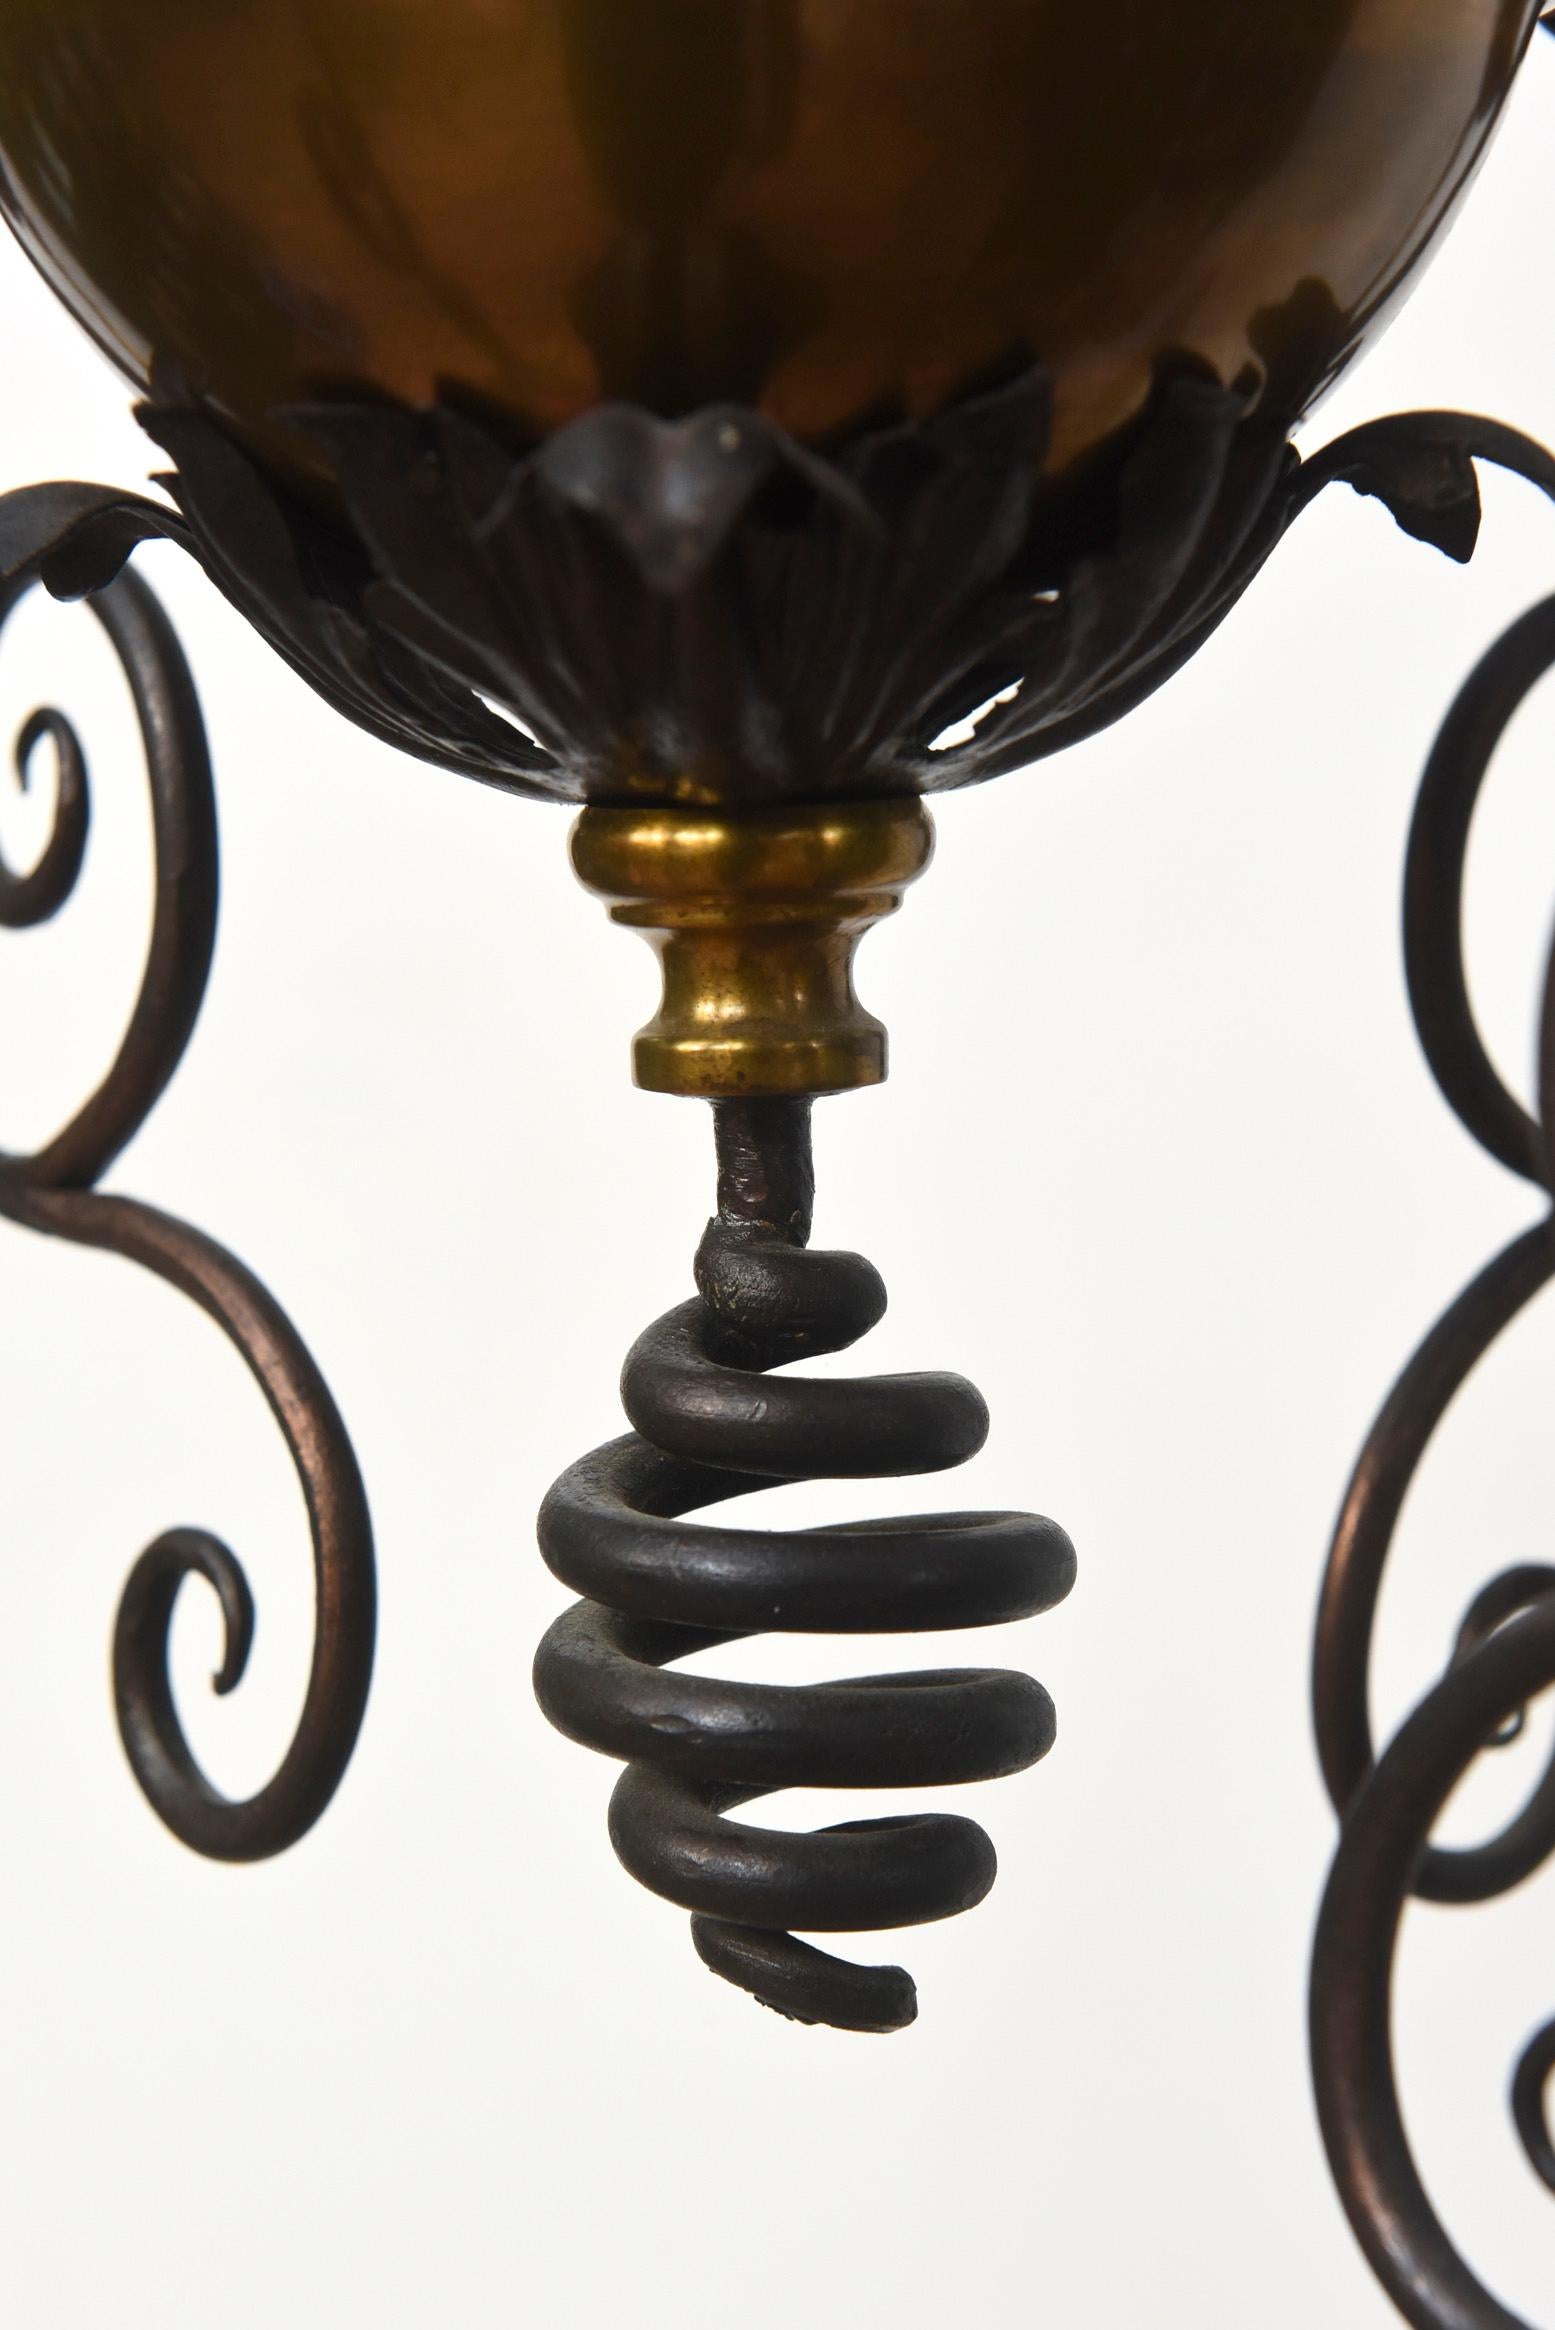 Four Light Early Electric Fixture. Wrought iron and brass. Completely restored and rewired. Original etched glass. American, C. 1900

Dimensions: 
Height: 24